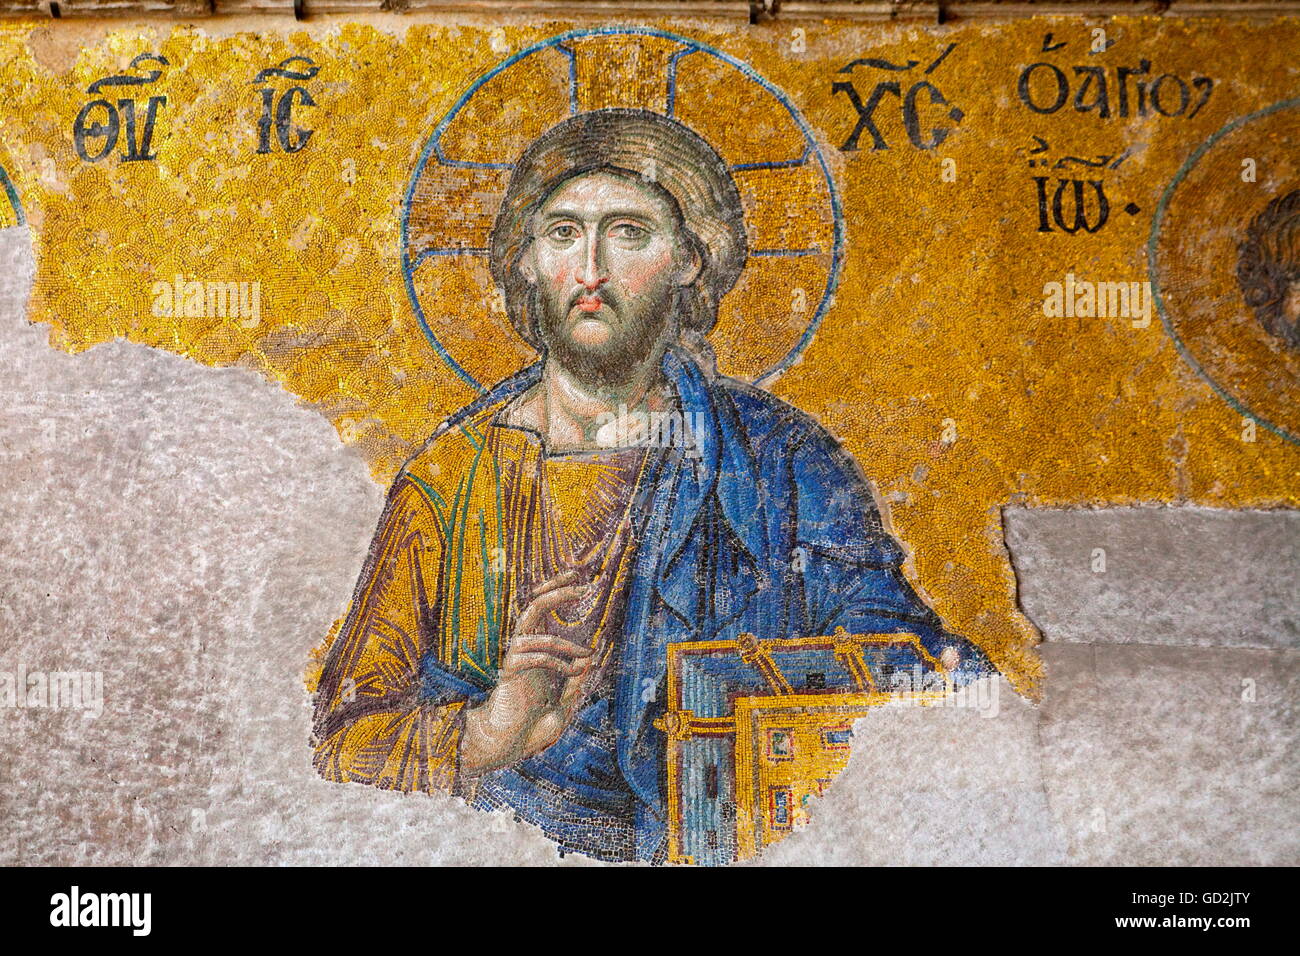 fine arts, religious art, mosaic Christ Pantokrator, Hagia Sophia, Istanbul, Artist's Copyright has not to be cleared Stock Photo